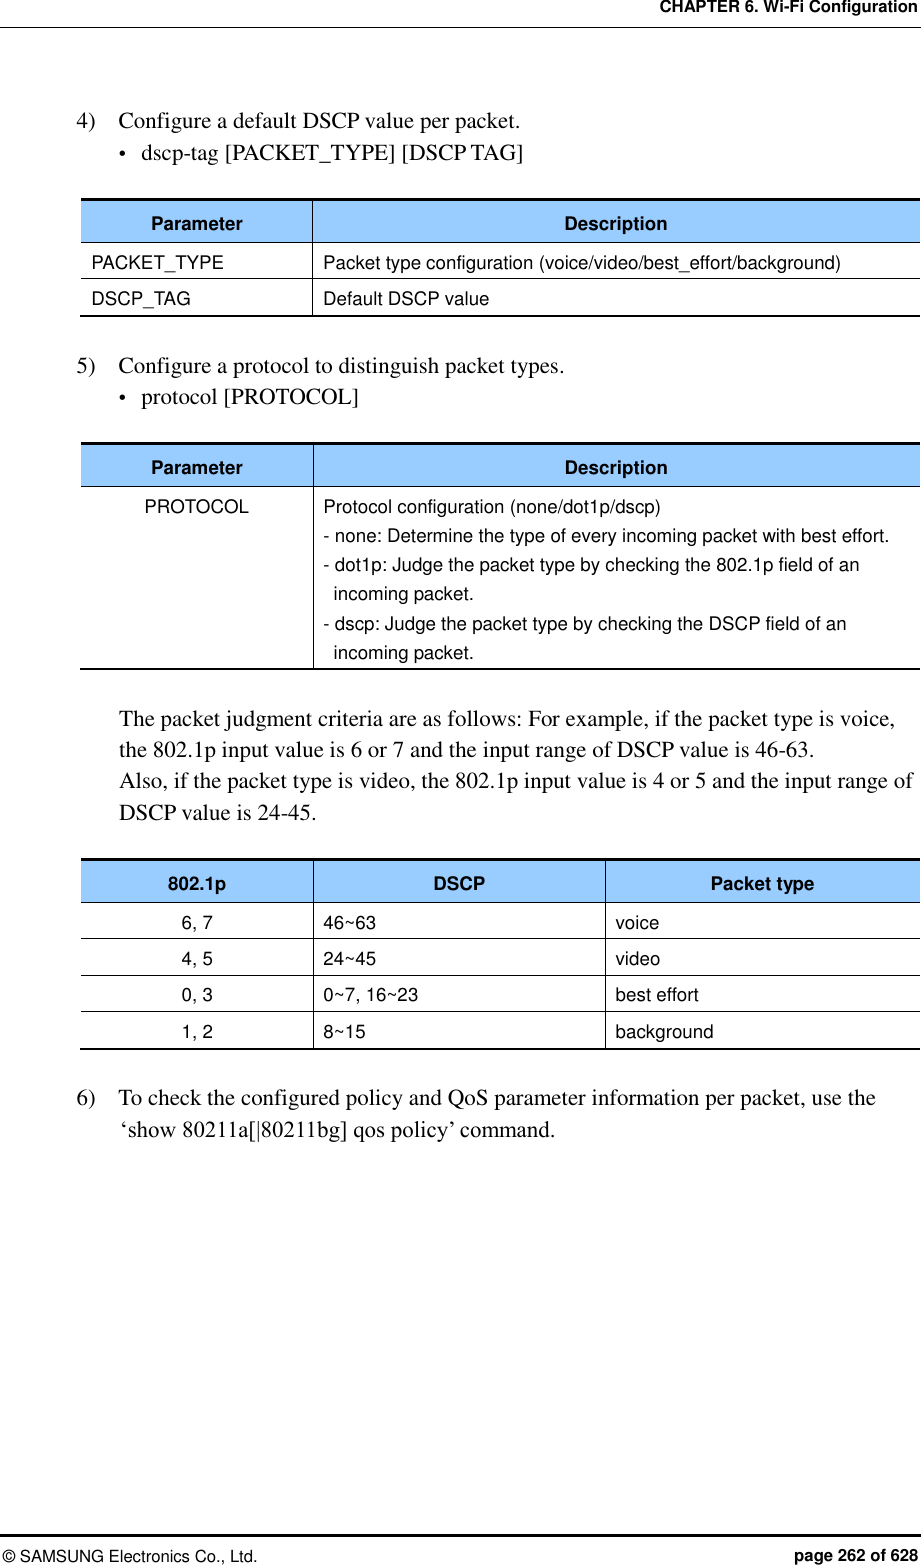 CHAPTER 6. Wi-Fi Configuration ©  SAMSUNG Electronics Co., Ltd.  page 262 of 628 4)    Configure a default DSCP value per packet.  dscp-tag [PACKET_TYPE] [DSCP TAG]  Parameter Description PACKET_TYPE Packet type configuration (voice/video/best_effort/background) DSCP_TAG Default DSCP value  5)    Configure a protocol to distinguish packet types.  protocol [PROTOCOL]  Parameter Description PROTOCOL Protocol configuration (none/dot1p/dscp) - none: Determine the type of every incoming packet with best effort. - dot1p: Judge the packet type by checking the 802.1p field of an incoming packet. - dscp: Judge the packet type by checking the DSCP field of an incoming packet.  The packet judgment criteria are as follows: For example, if the packet type is voice, the 802.1p input value is 6 or 7 and the input range of DSCP value is 46-63.   Also, if the packet type is video, the 802.1p input value is 4 or 5 and the input range of DSCP value is 24-45.  802.1p DSCP Packet type 6, 7 46~63 voice 4, 5 24~45 video 0, 3 0~7, 16~23 best effort 1, 2 8~15 background  6)    To check the configured policy and QoS parameter information per packet, use the ‘show 80211a[|80211bg] qos policy’ command.  